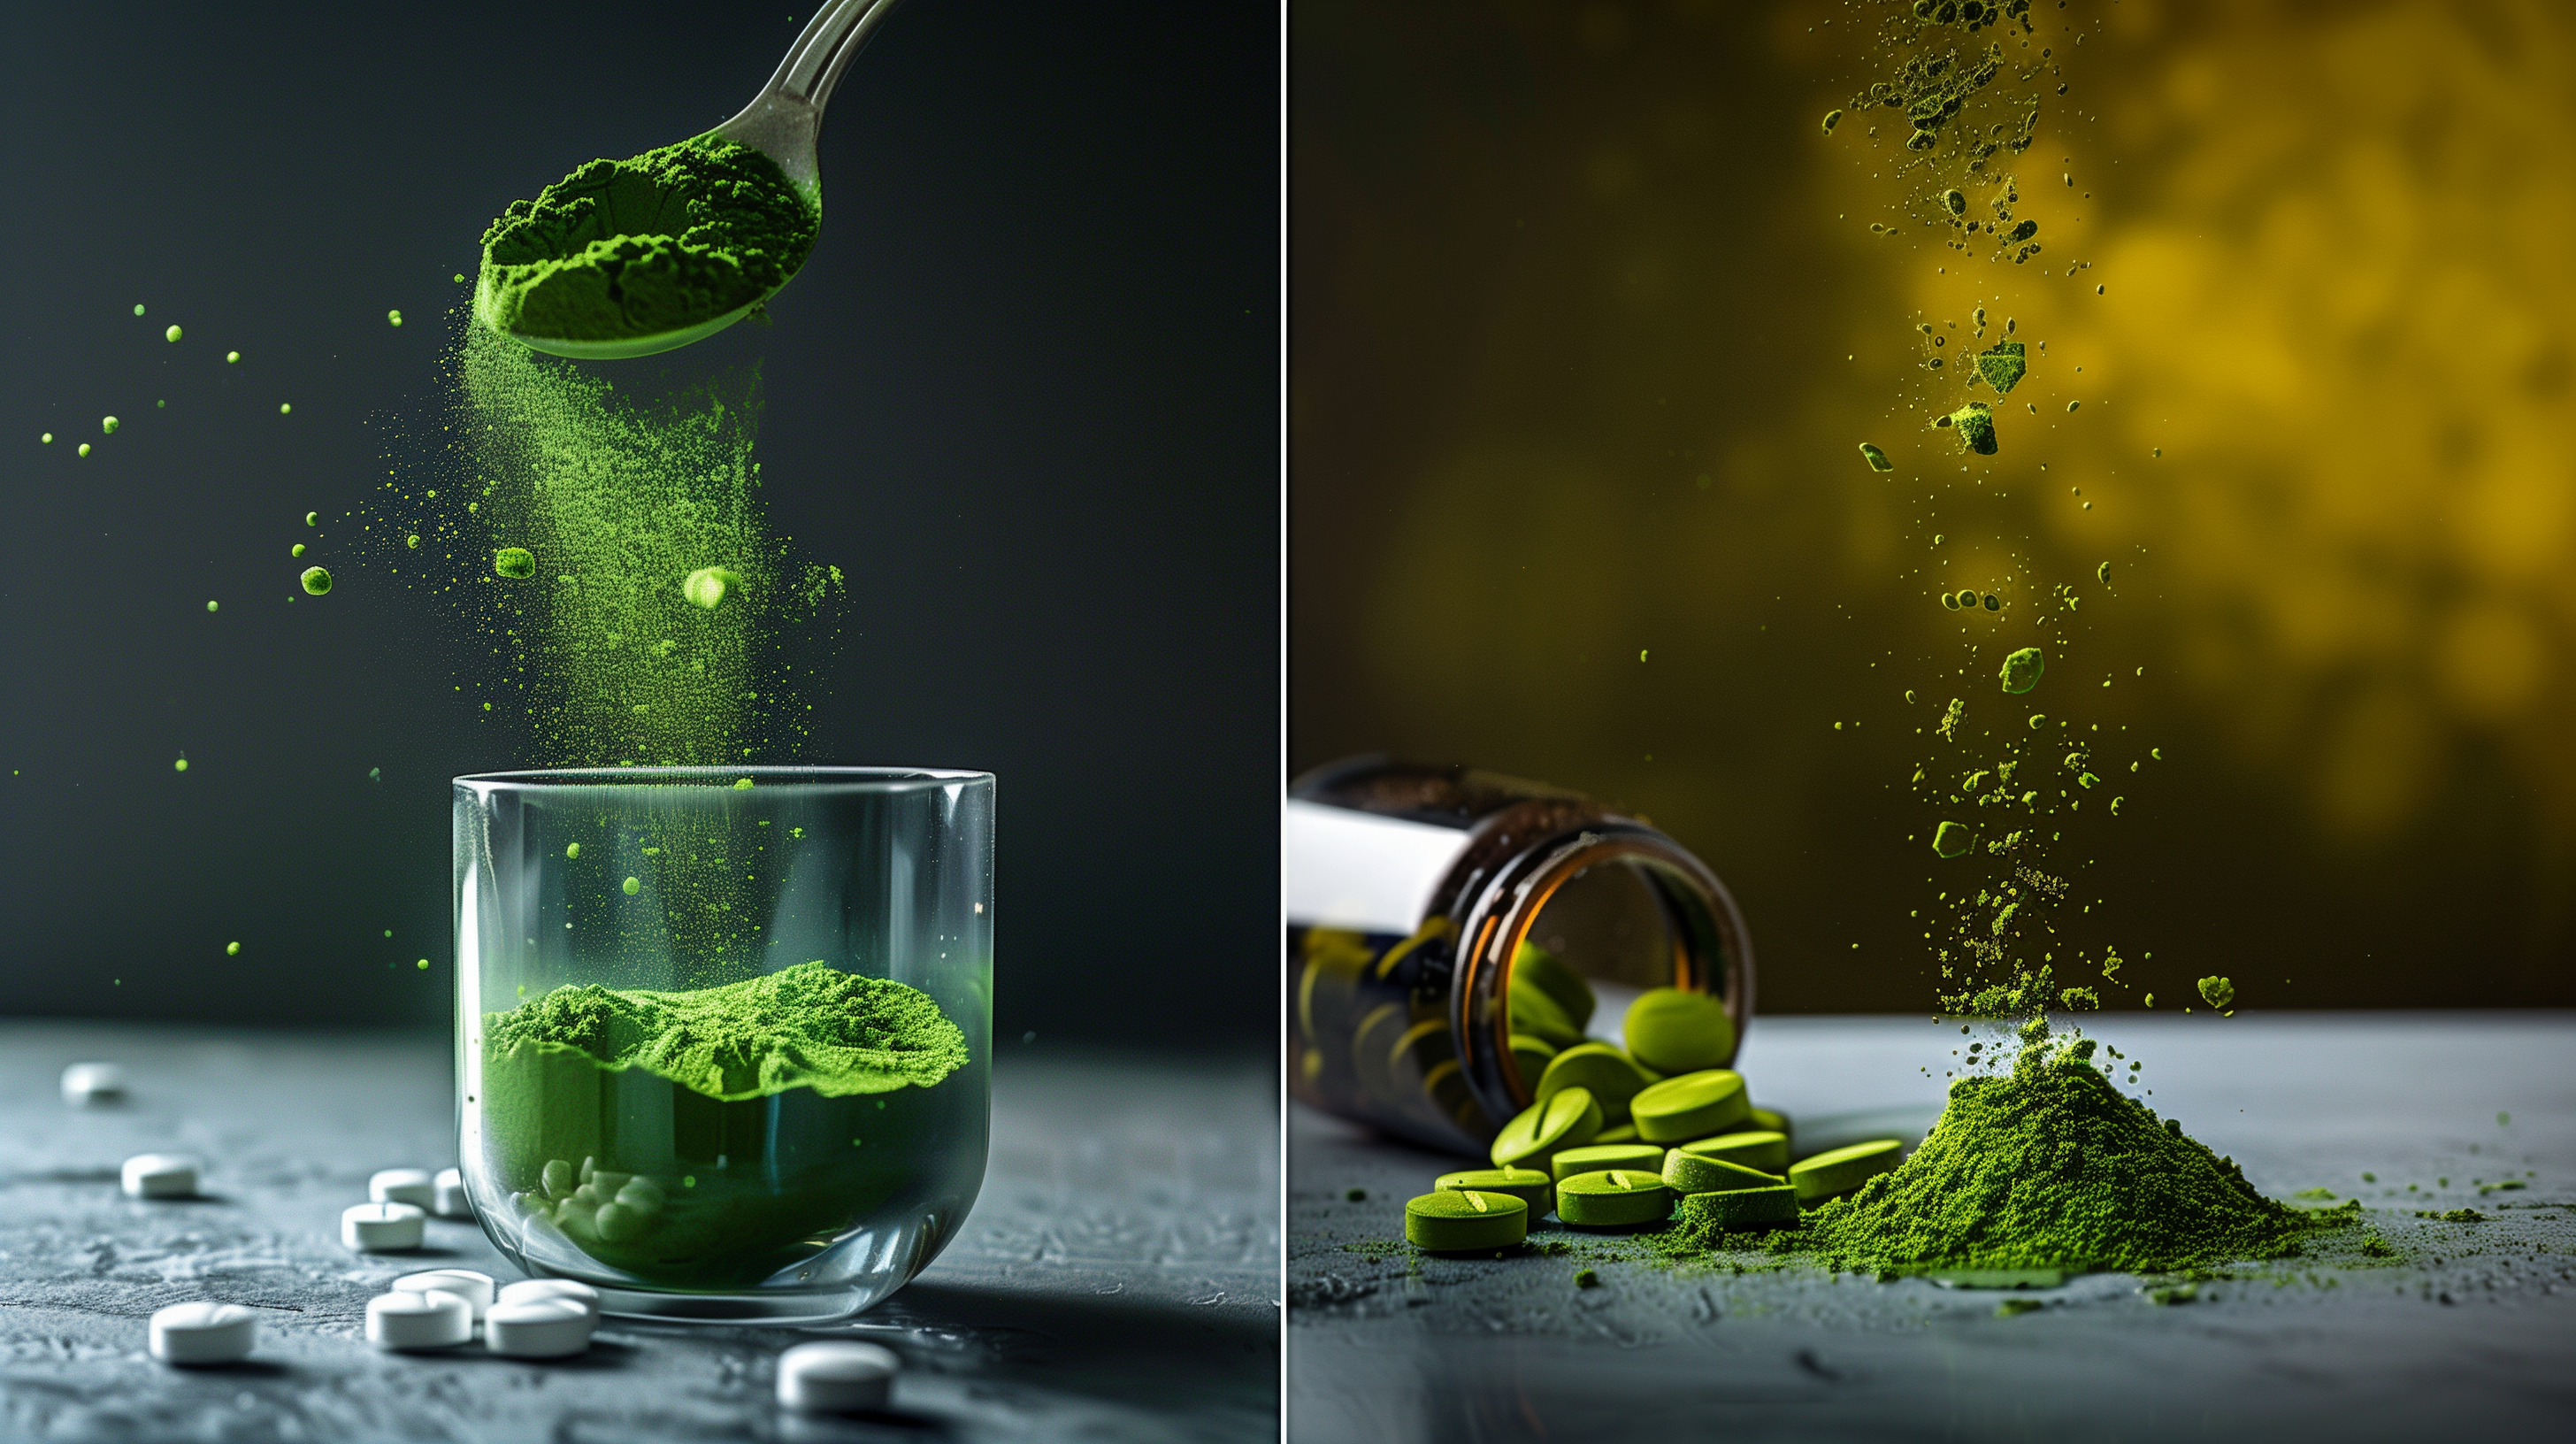 split scene: on one side, a vibrant green powder being spooned into a glass, and on the other, a pill bottle tipping over